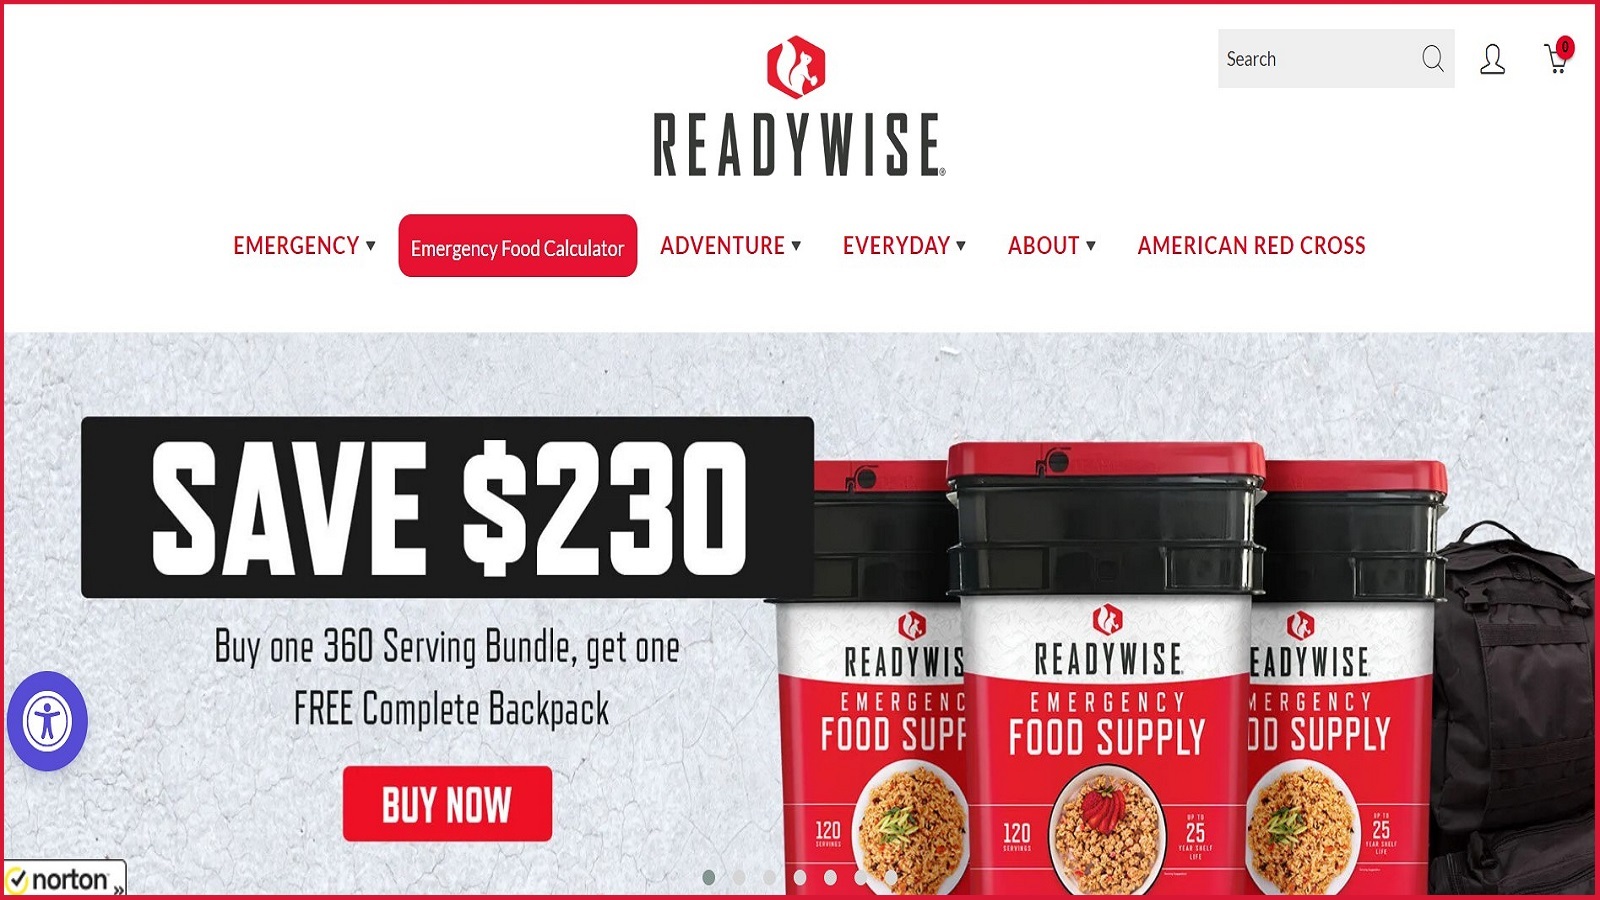 ReadyWise Emergency Food Supply Review: Should You Buy It?